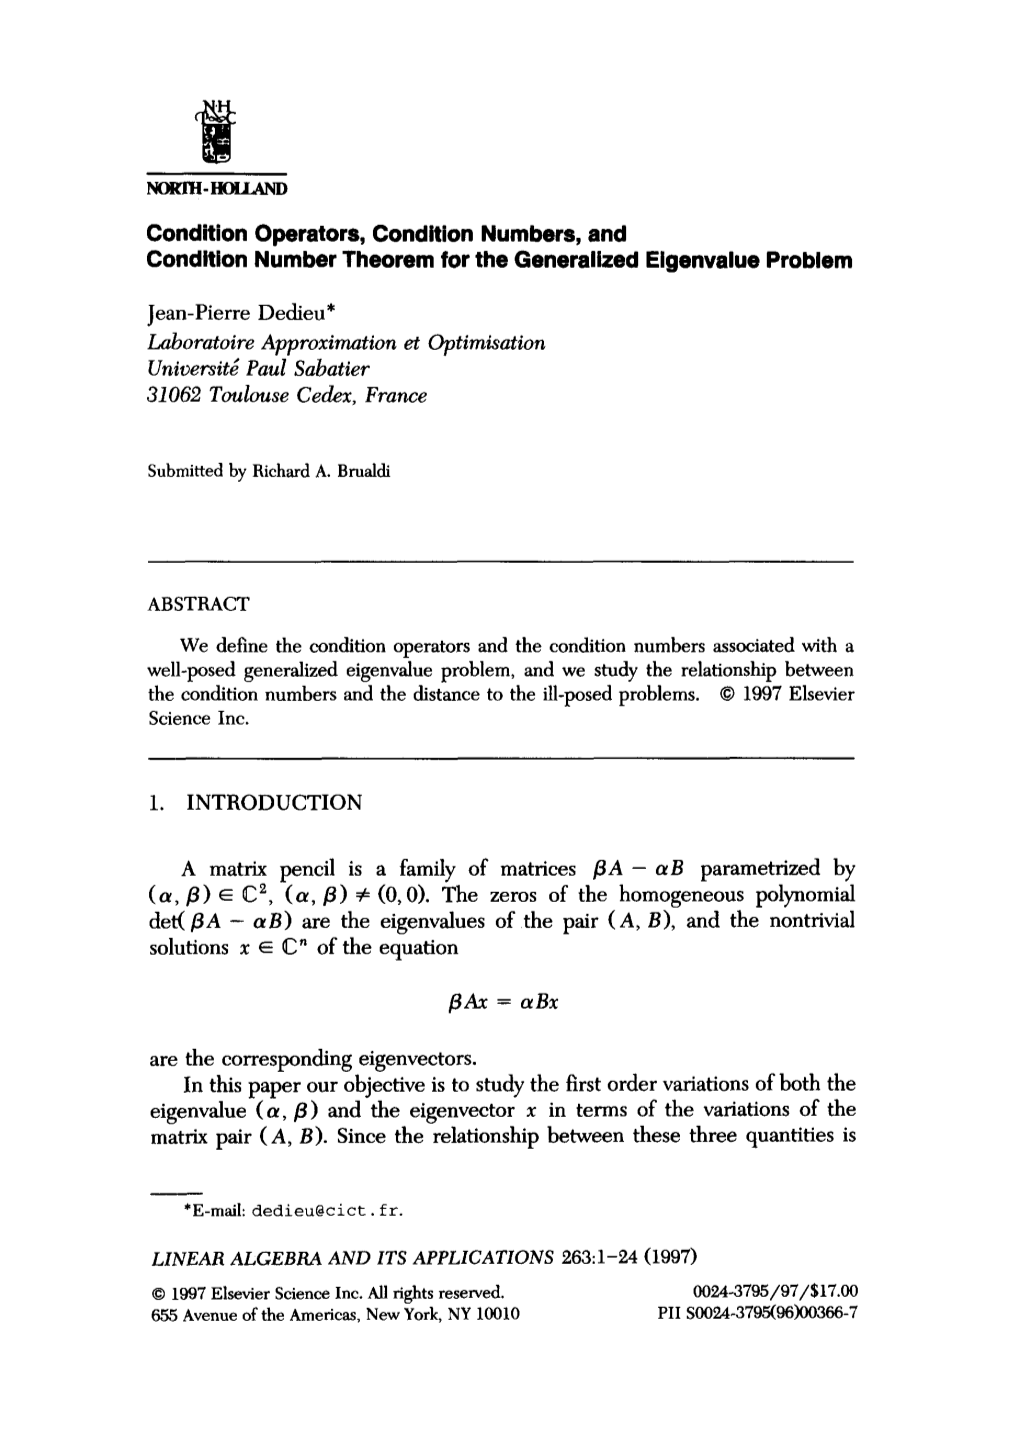 Condition Operators, Condition Numbers, and Condition Number Theorem for the Generalized Elgenvalue Problem